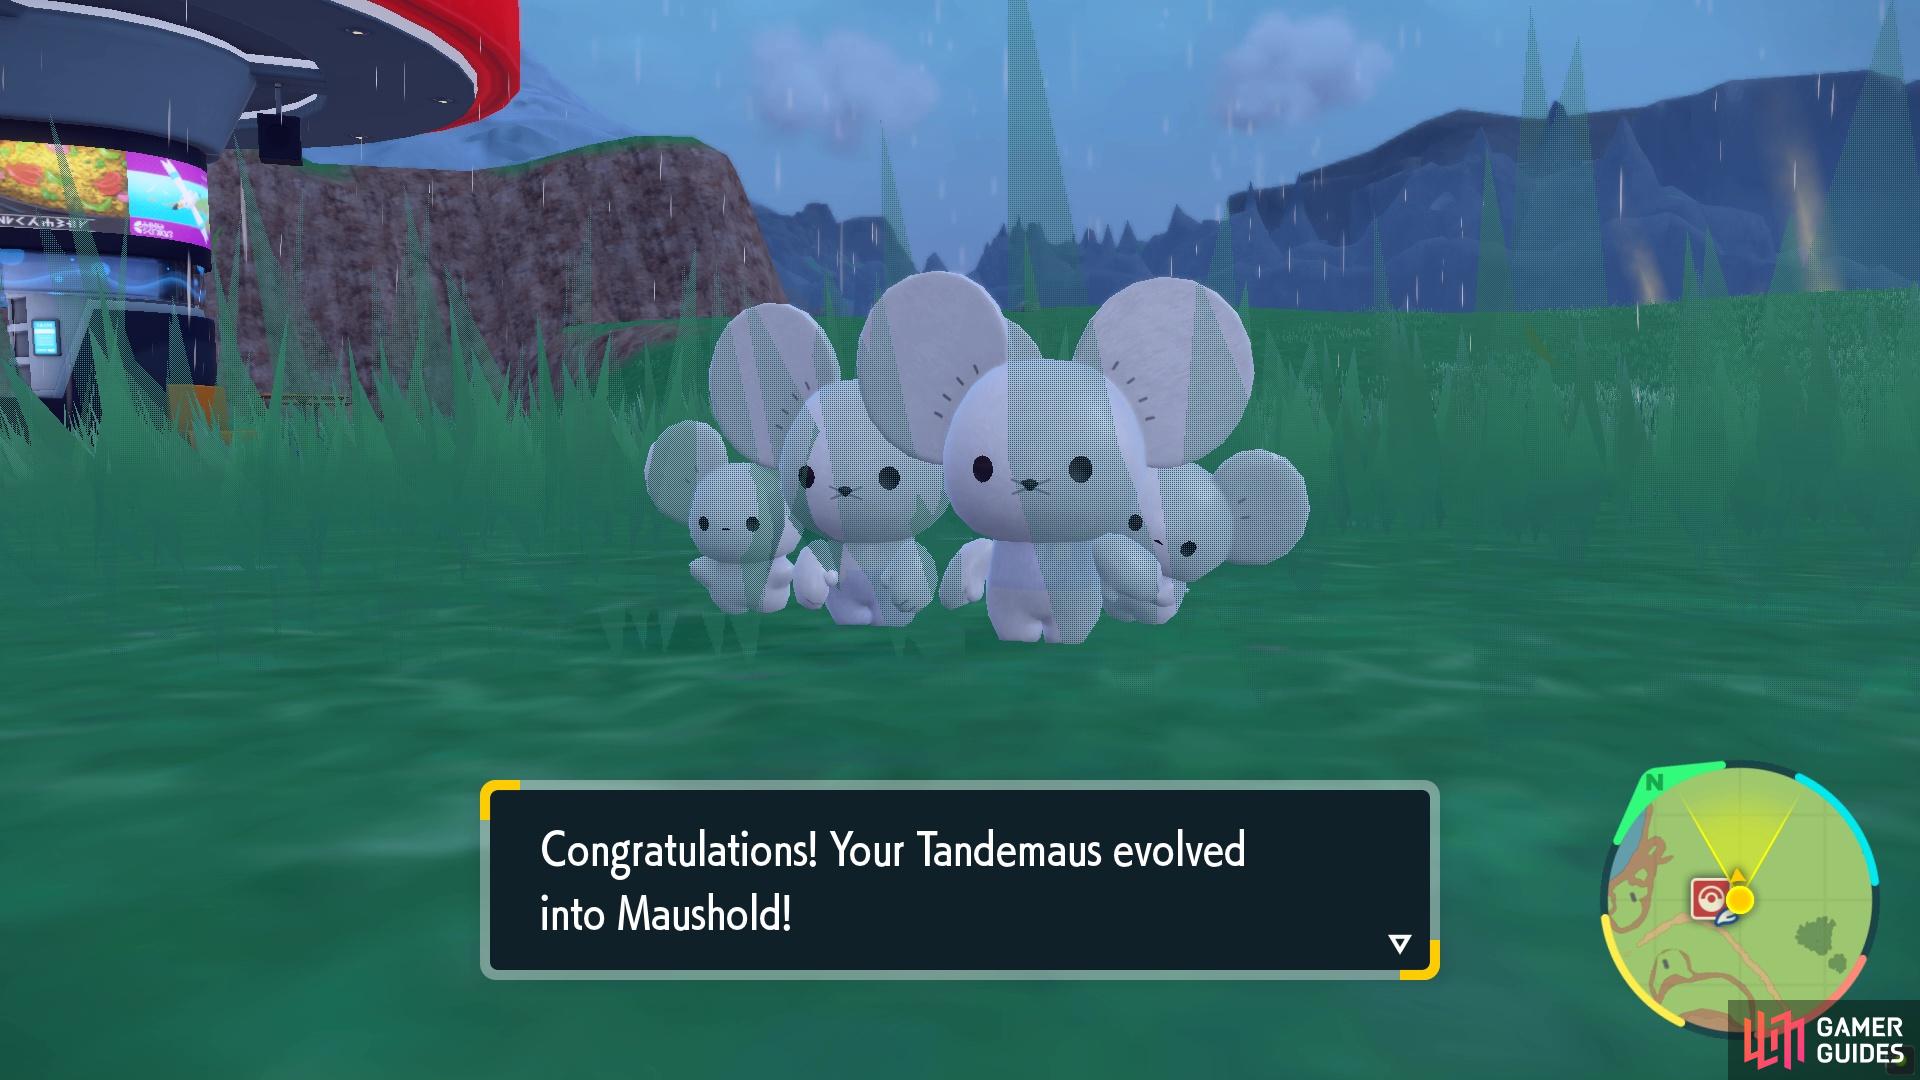 Maushold is evolved from Tandemaus.